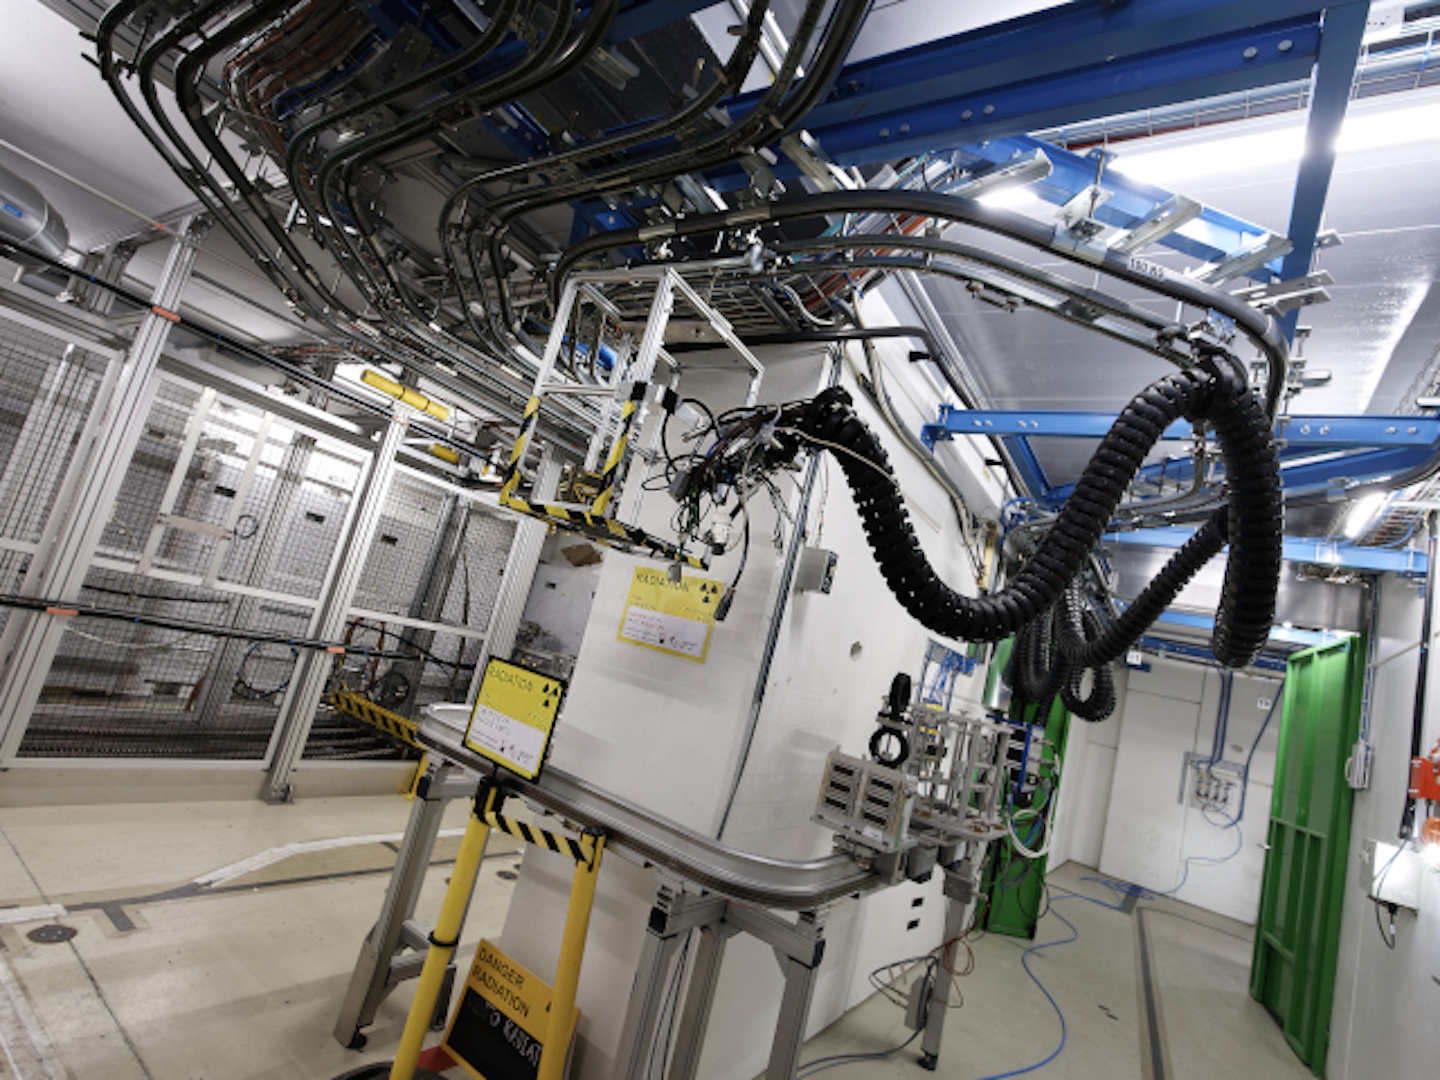 HEARTS will equip the CHARM heavy ion facility, located at CERN, to meet the needs of the space community for the radiation effects testing of electronics components and systems.